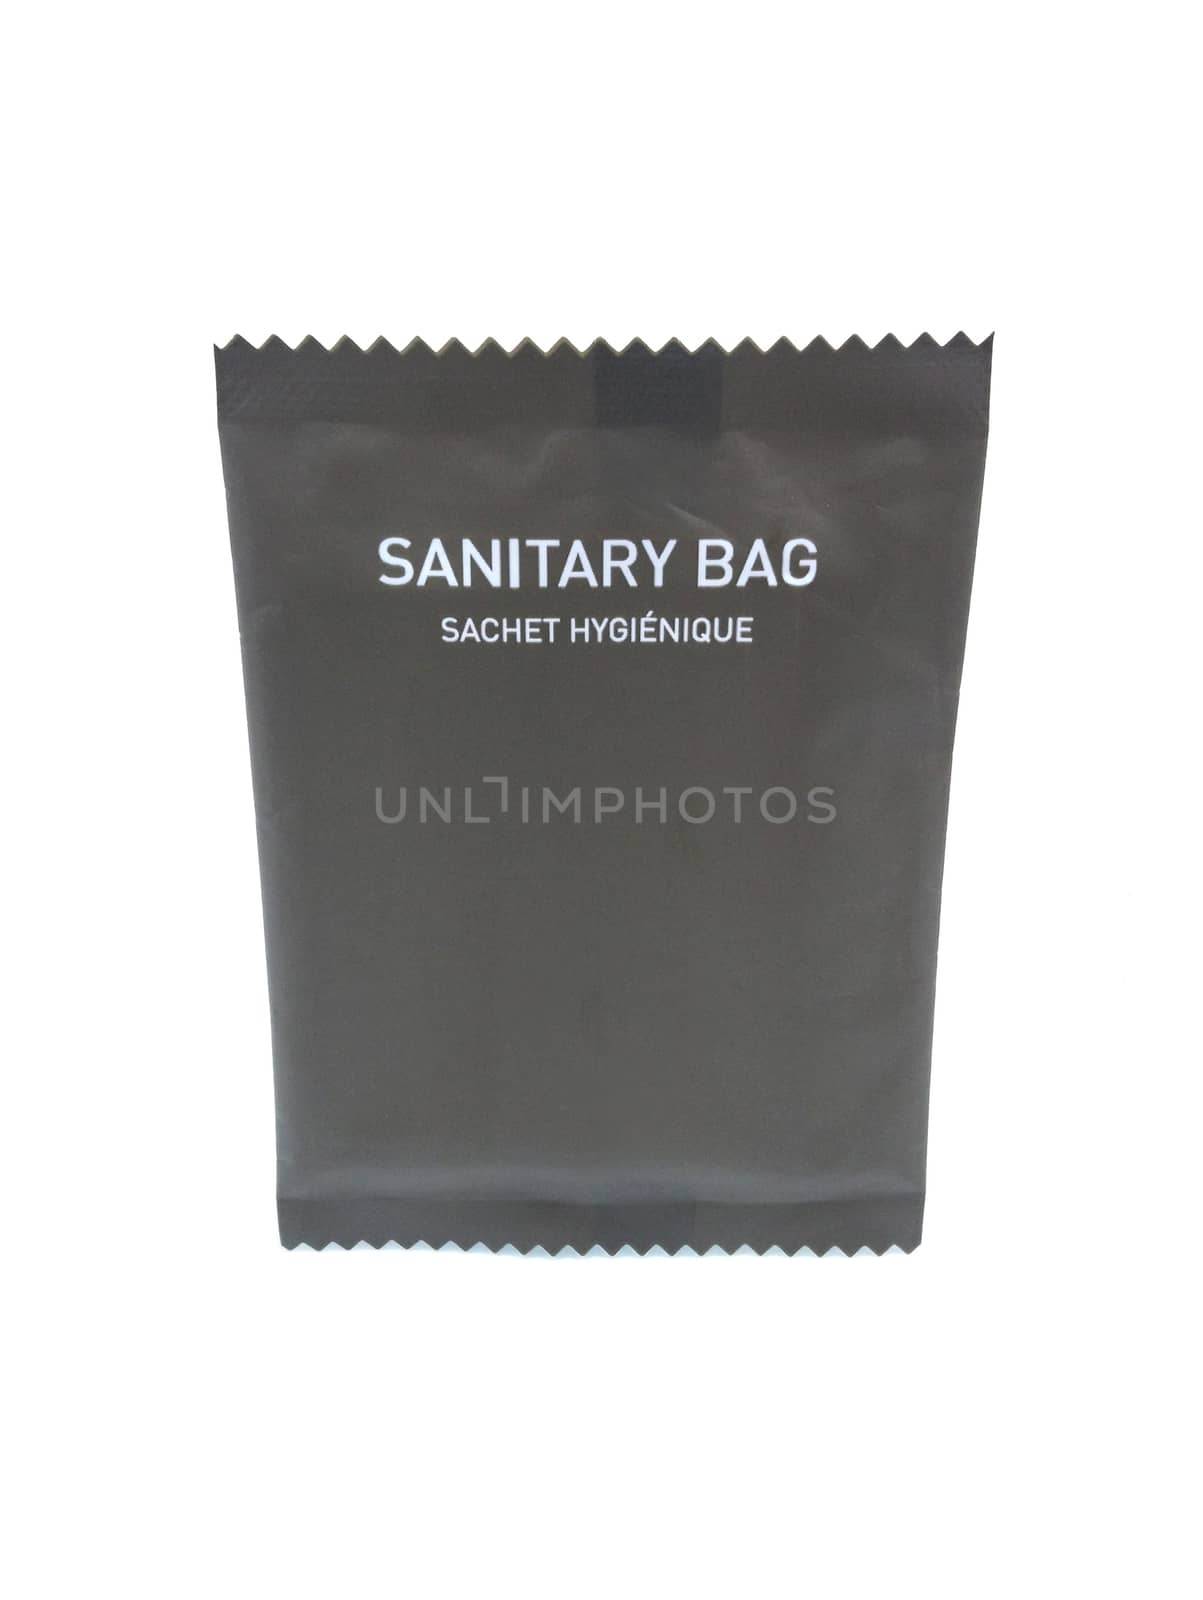 Sanitary bag small pack hotel complimentary use to put wet clothes